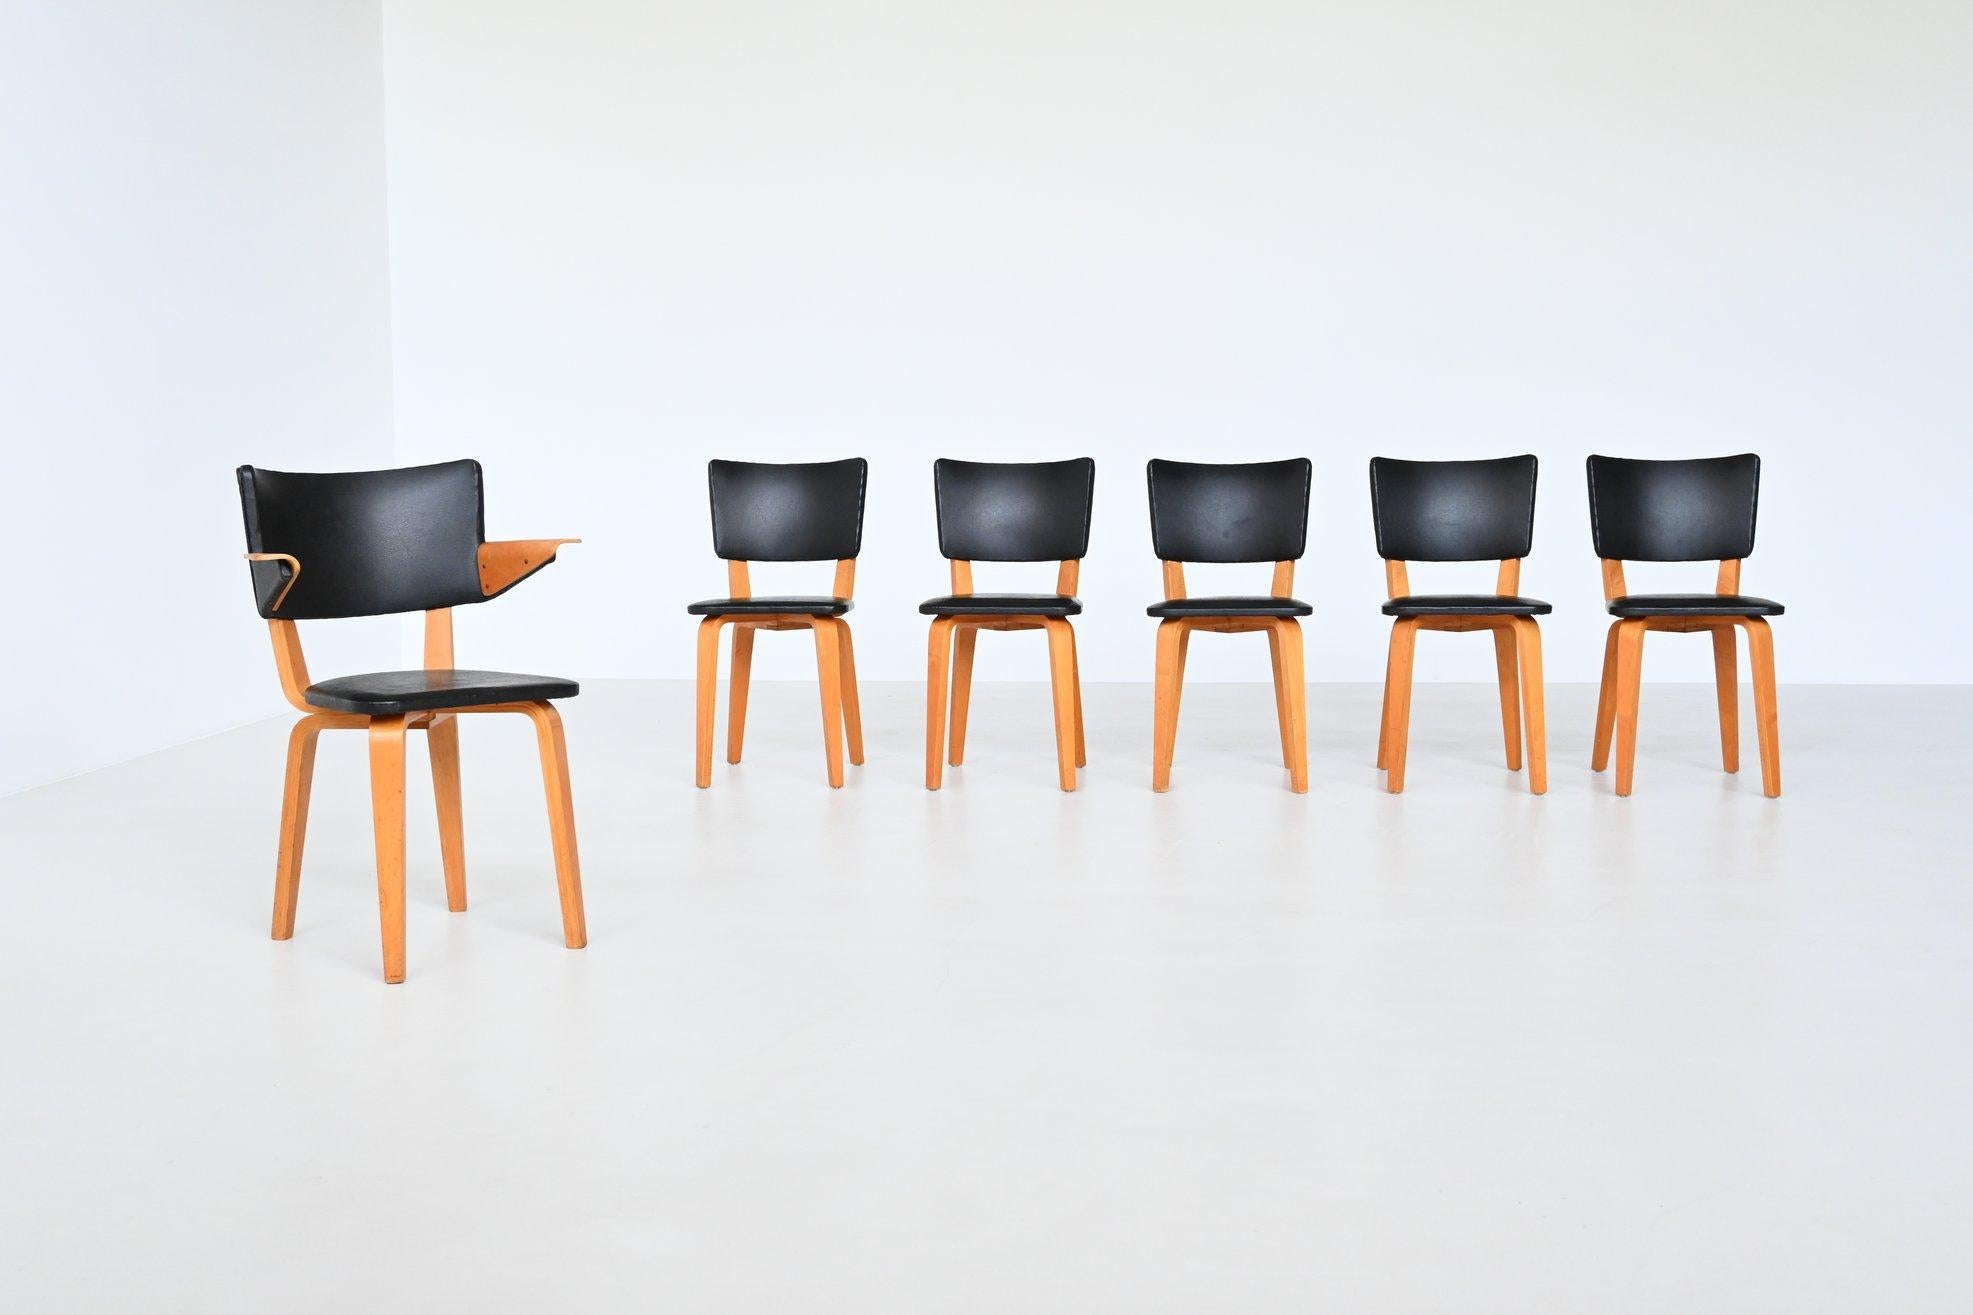 Very nice and original set of six dining chairs model 500 designed by Cor Alons & J.C. Jansen and manufactured by Gouda den Boer, The Netherlands 1949. These chairs are made of birch plywood using the same technics Charles and Ray Eames uses. The